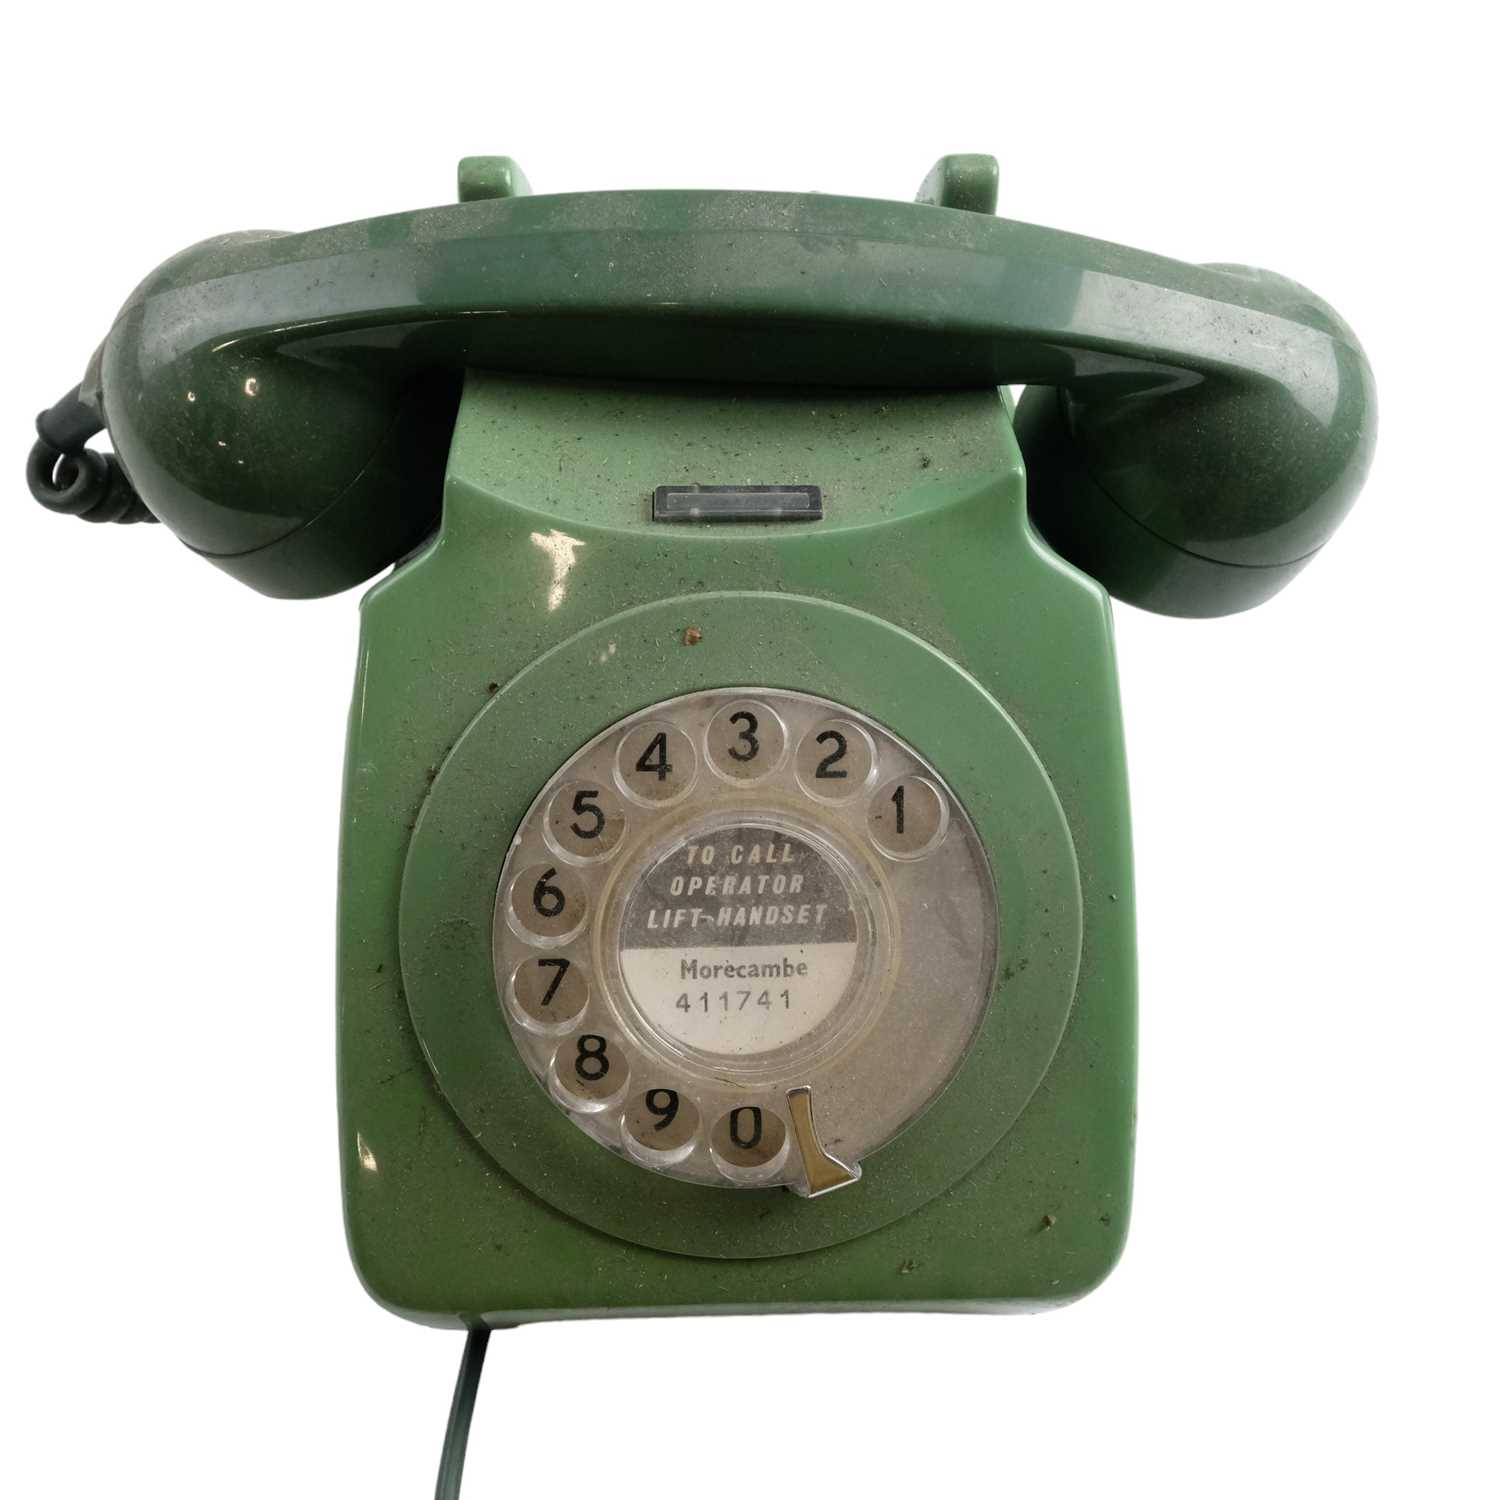 Eight 700 series rotary dial telephones, models 706 L, 706 F, 746 GNA and 746 GEN - Image 8 of 9